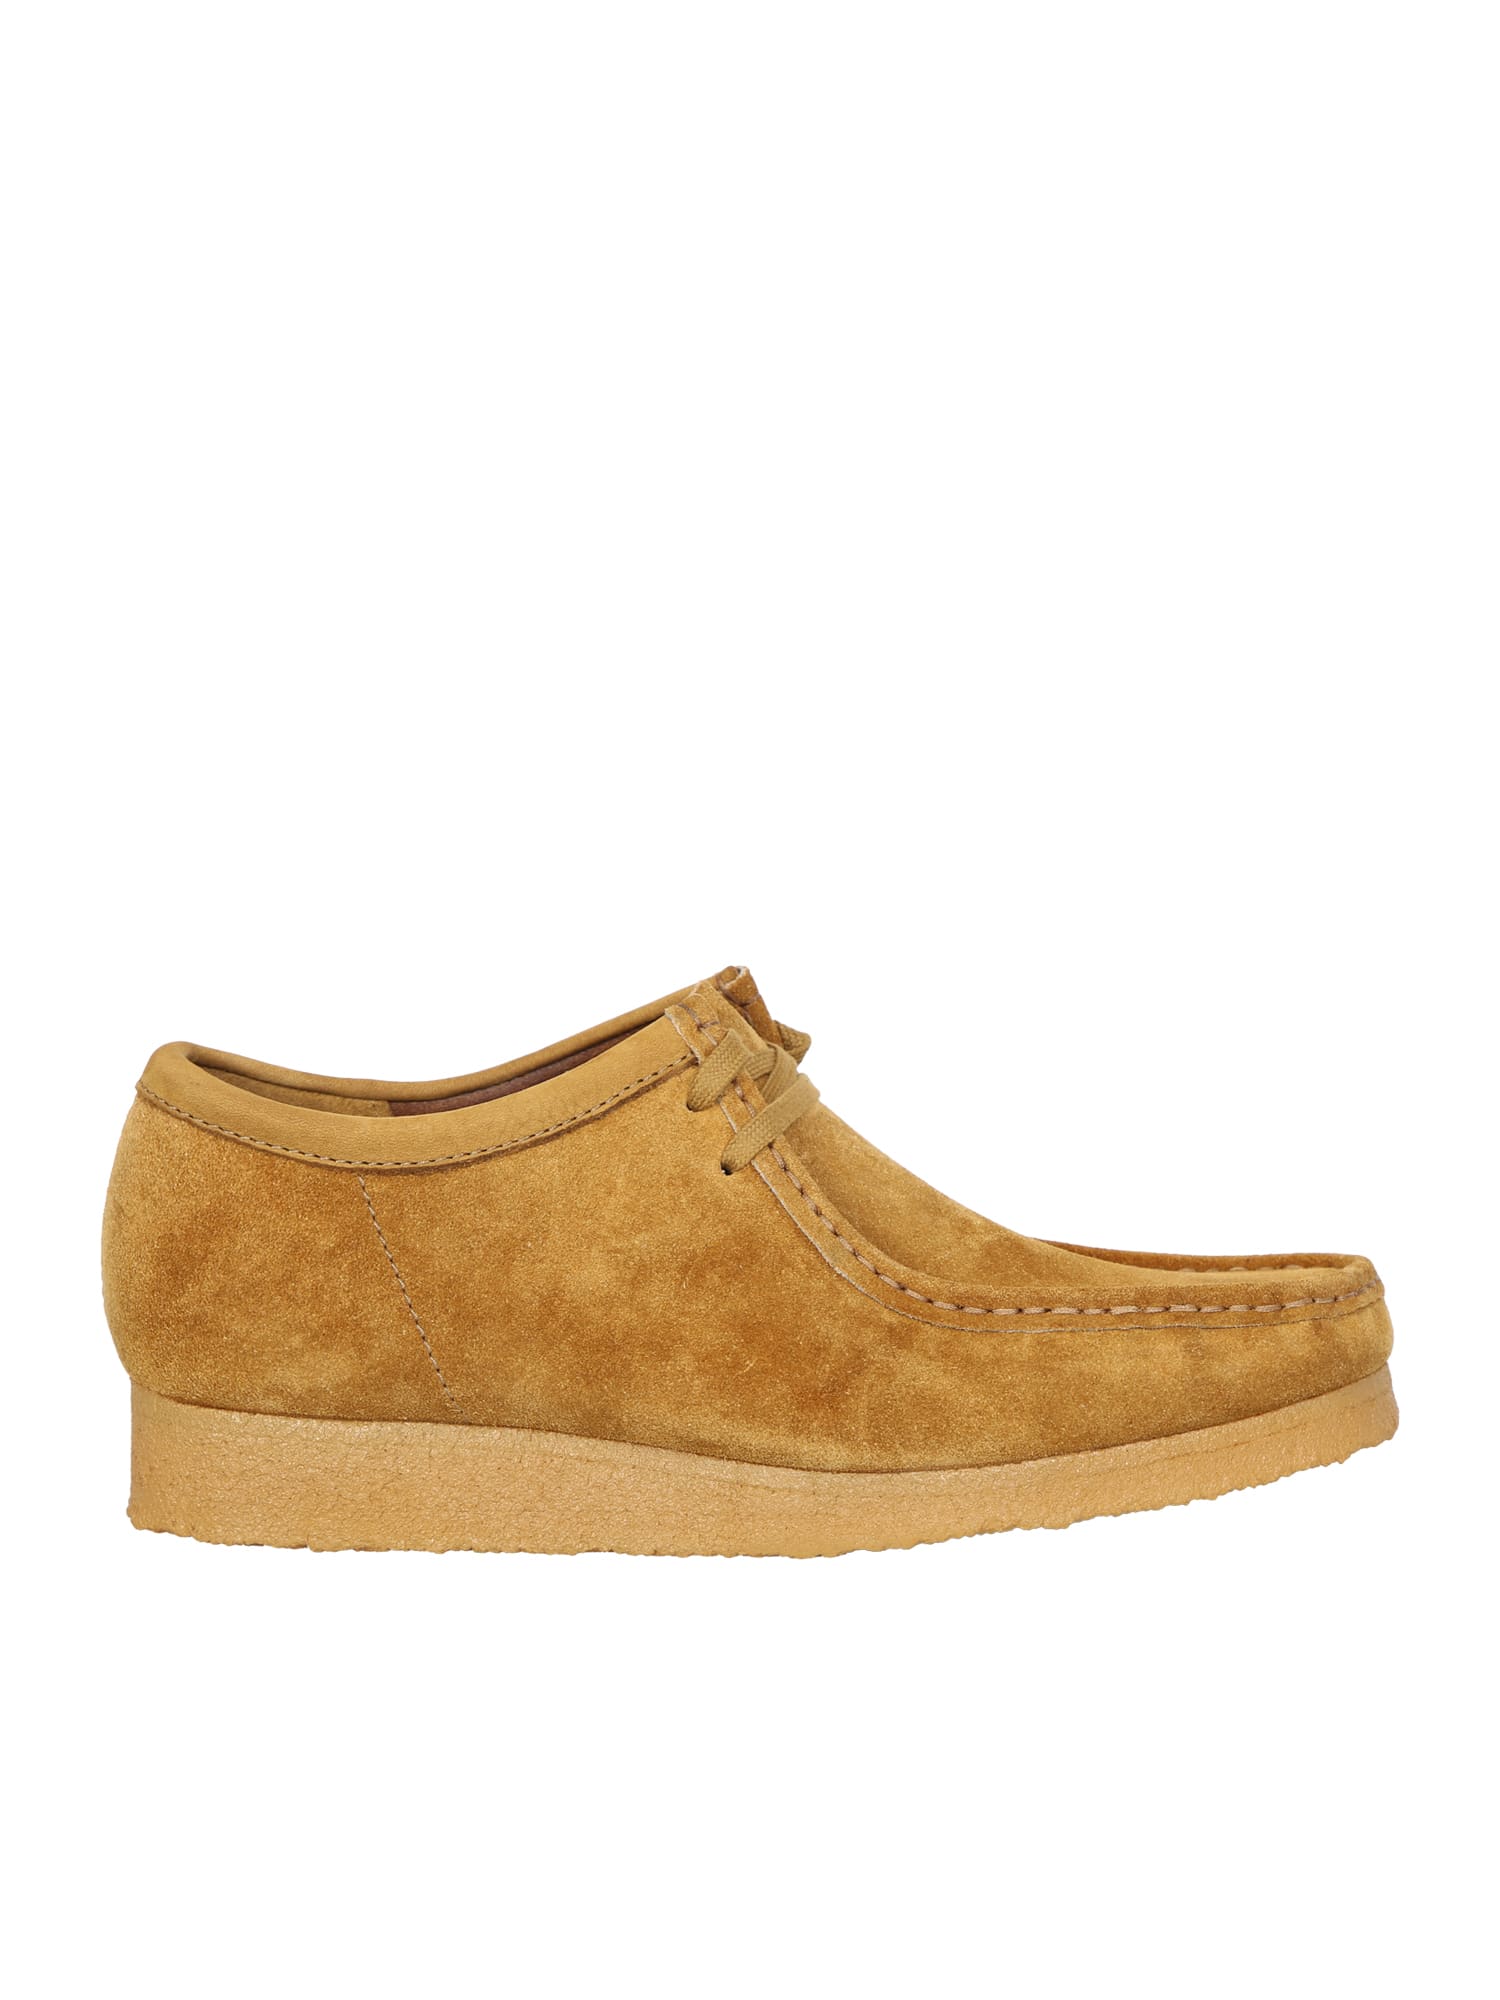 Clarks Wallabee Light Brown Ankle Boots